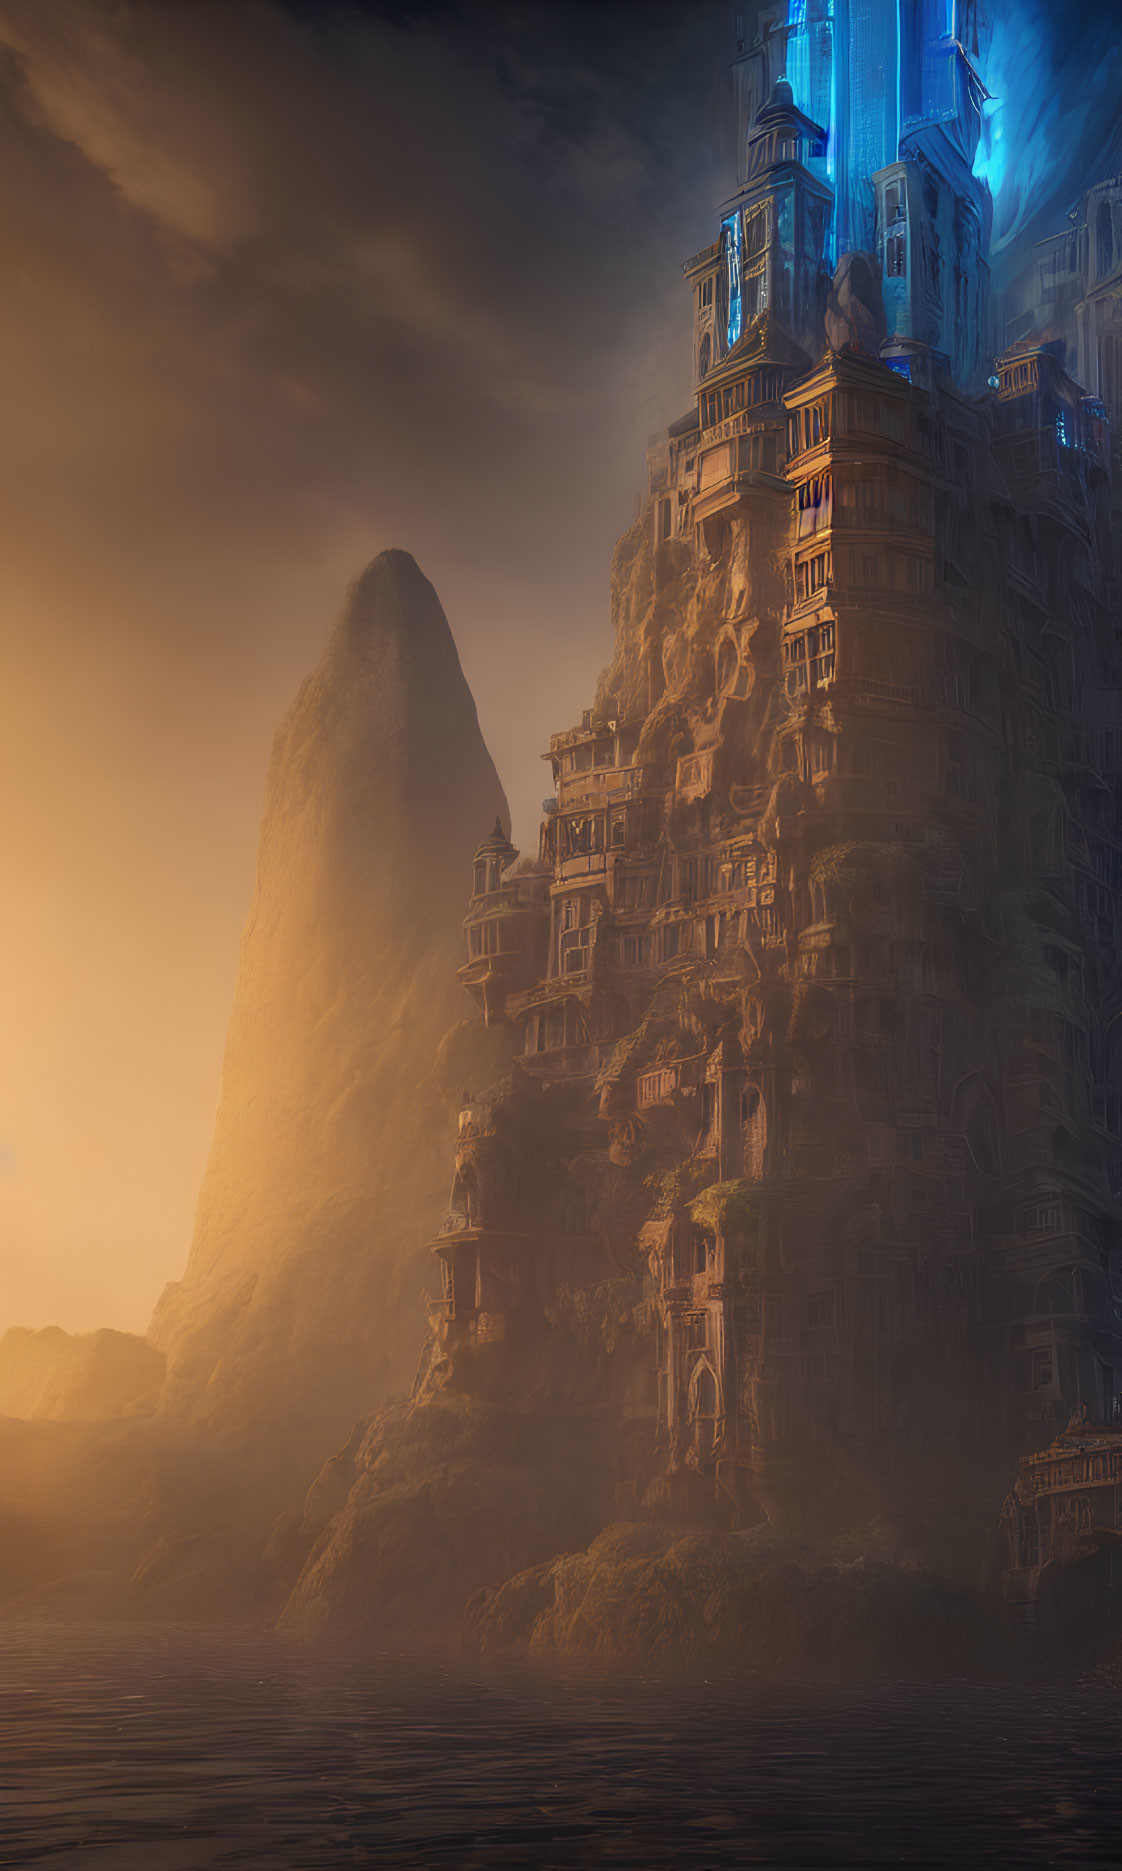 Mystical cliffside city glowing with blue lights in warm sunset haze